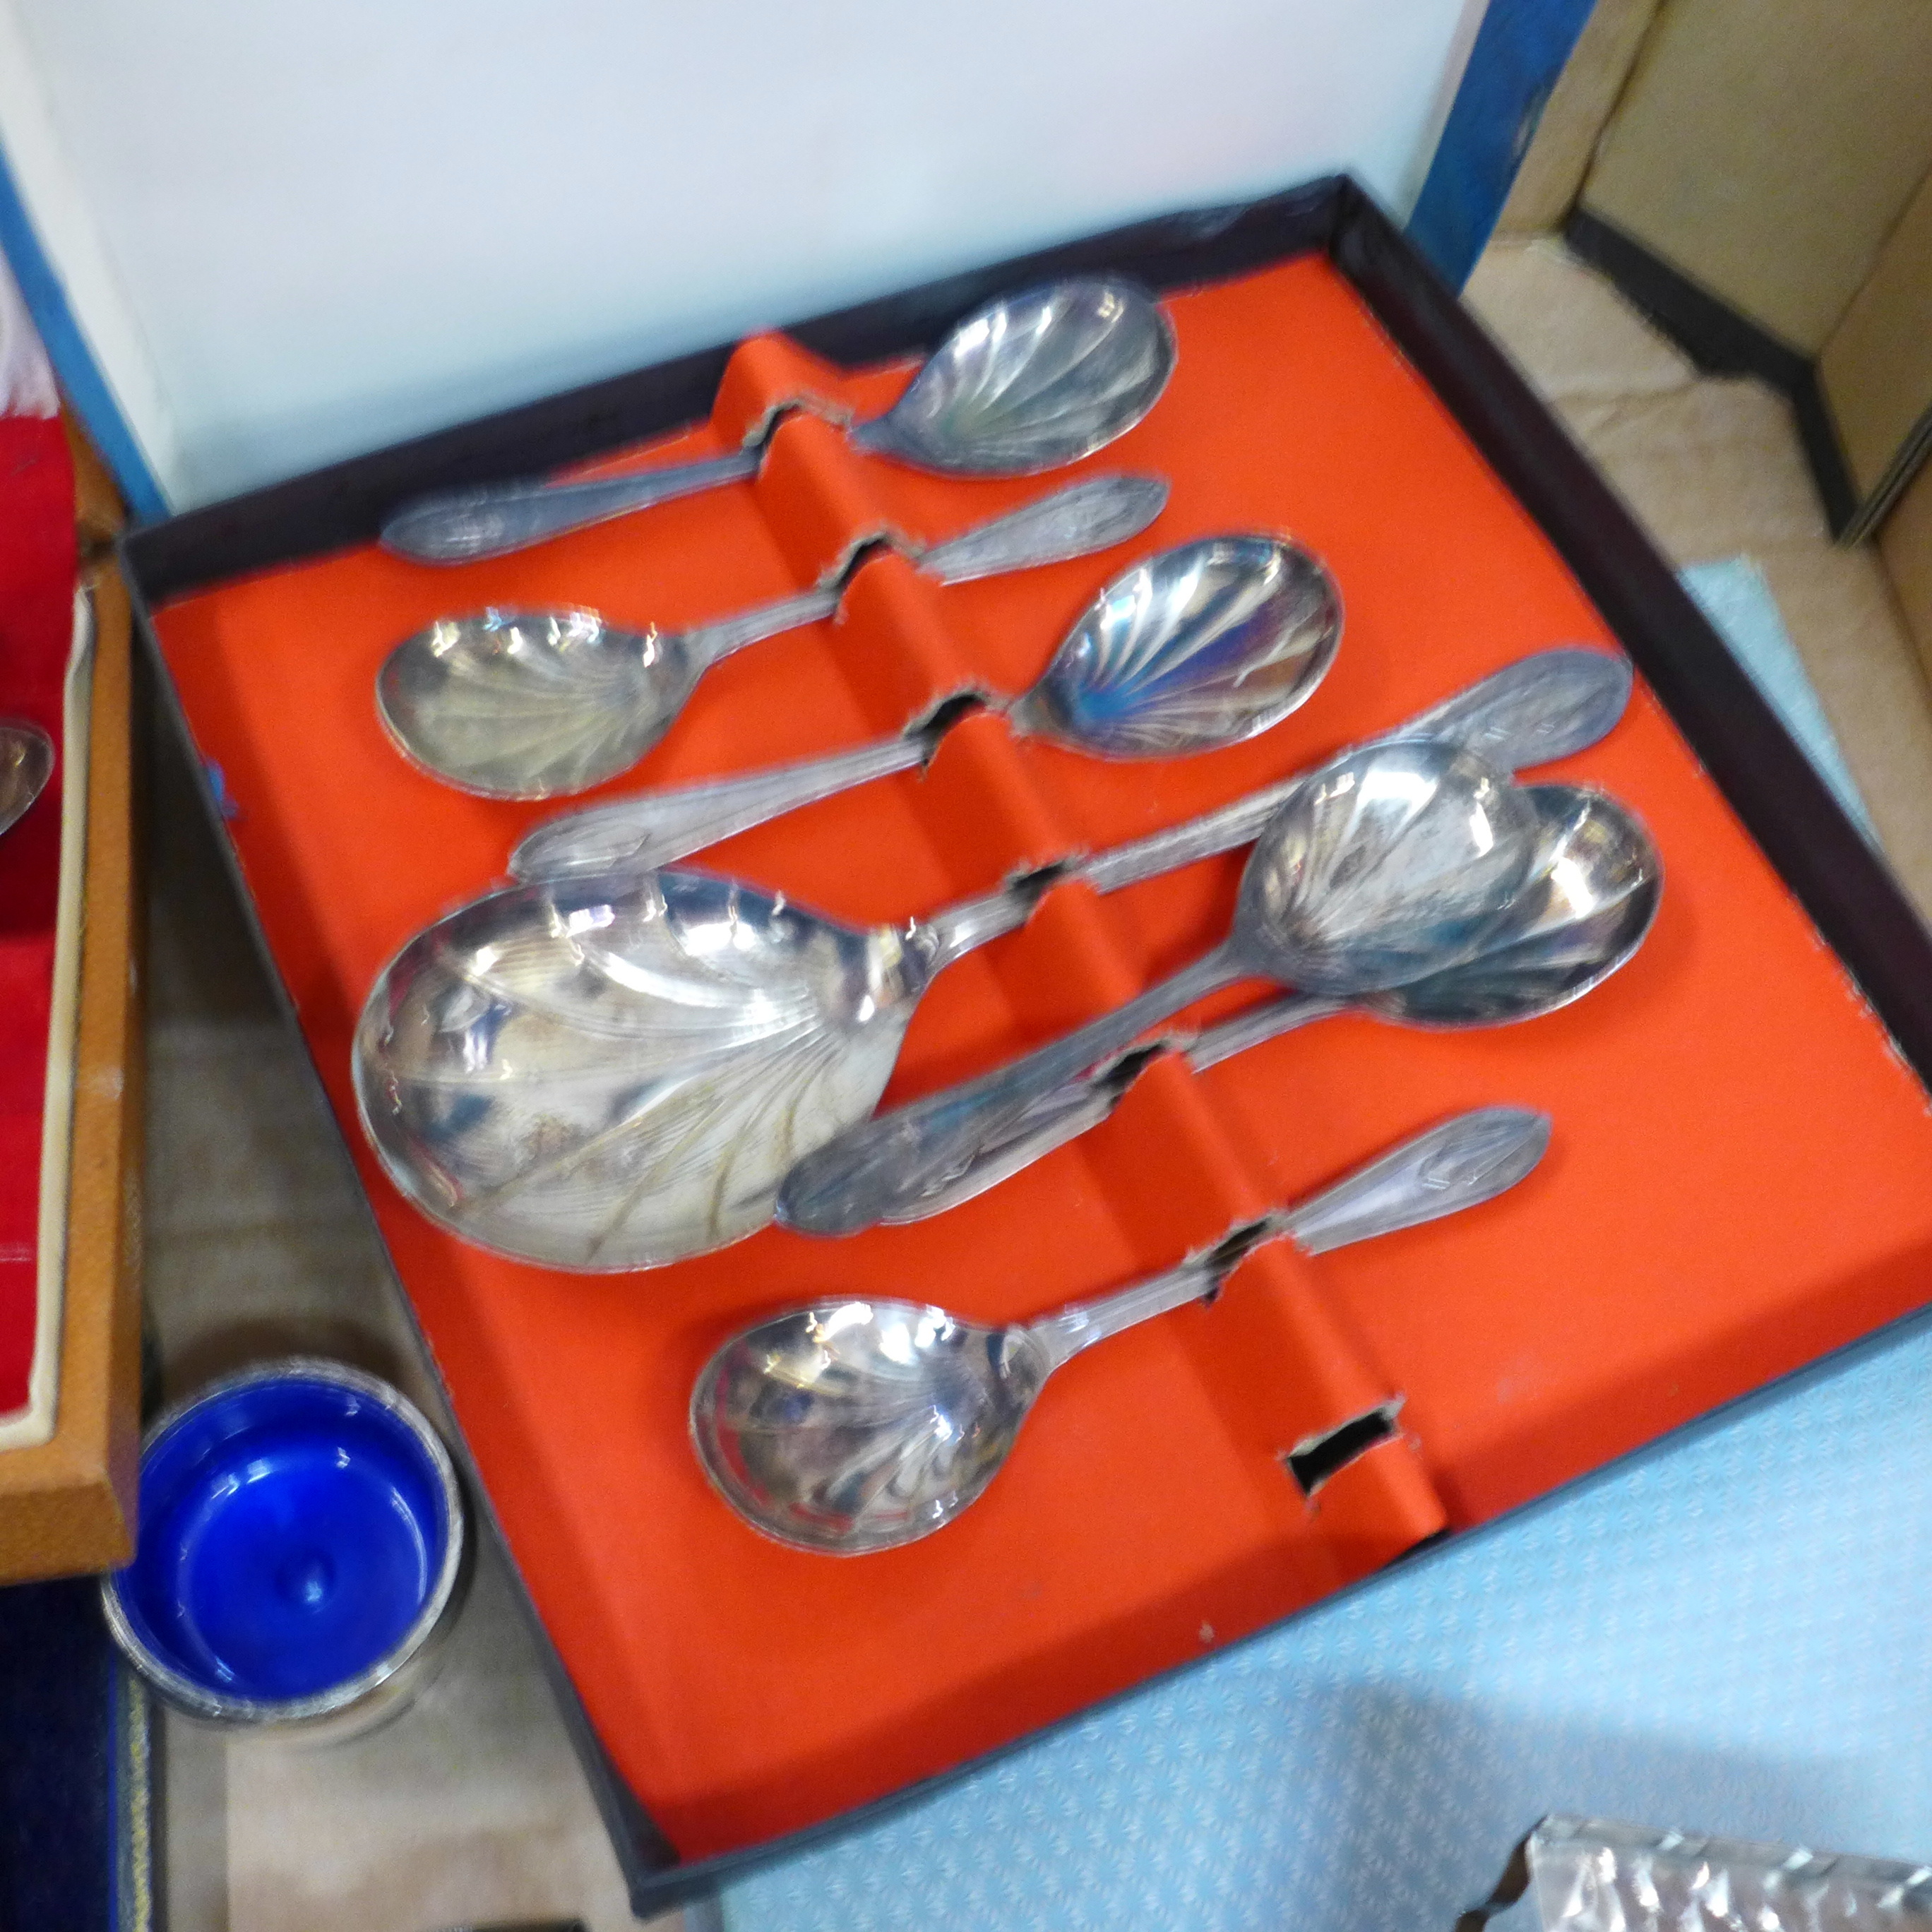 Plated and stainless steel flatware, plated goblet, and two sets of cutlery and cased cutlery sets - Bild 3 aus 4